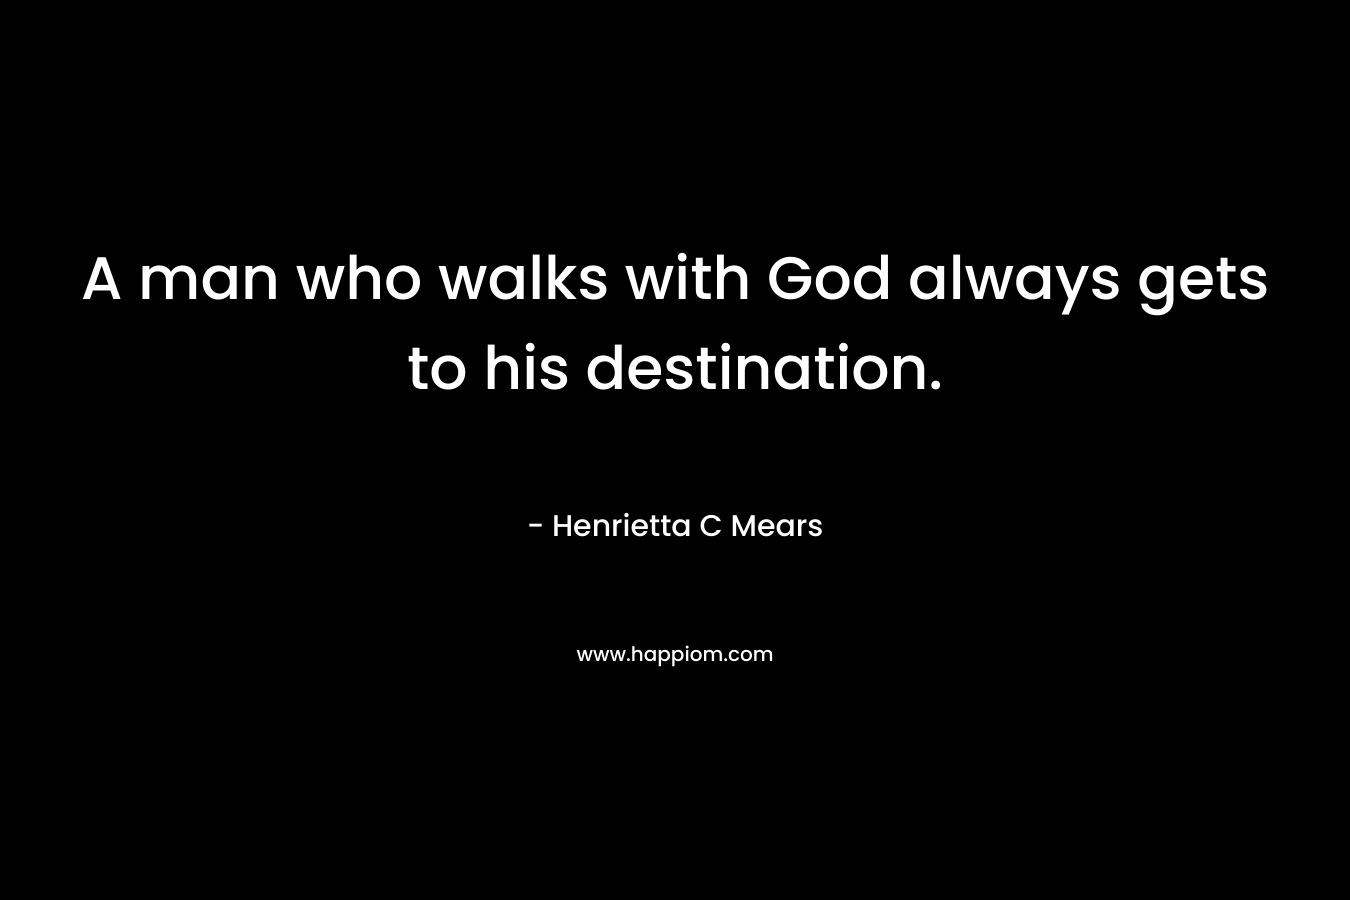 A man who walks with God always gets to his destination. – Henrietta C Mears